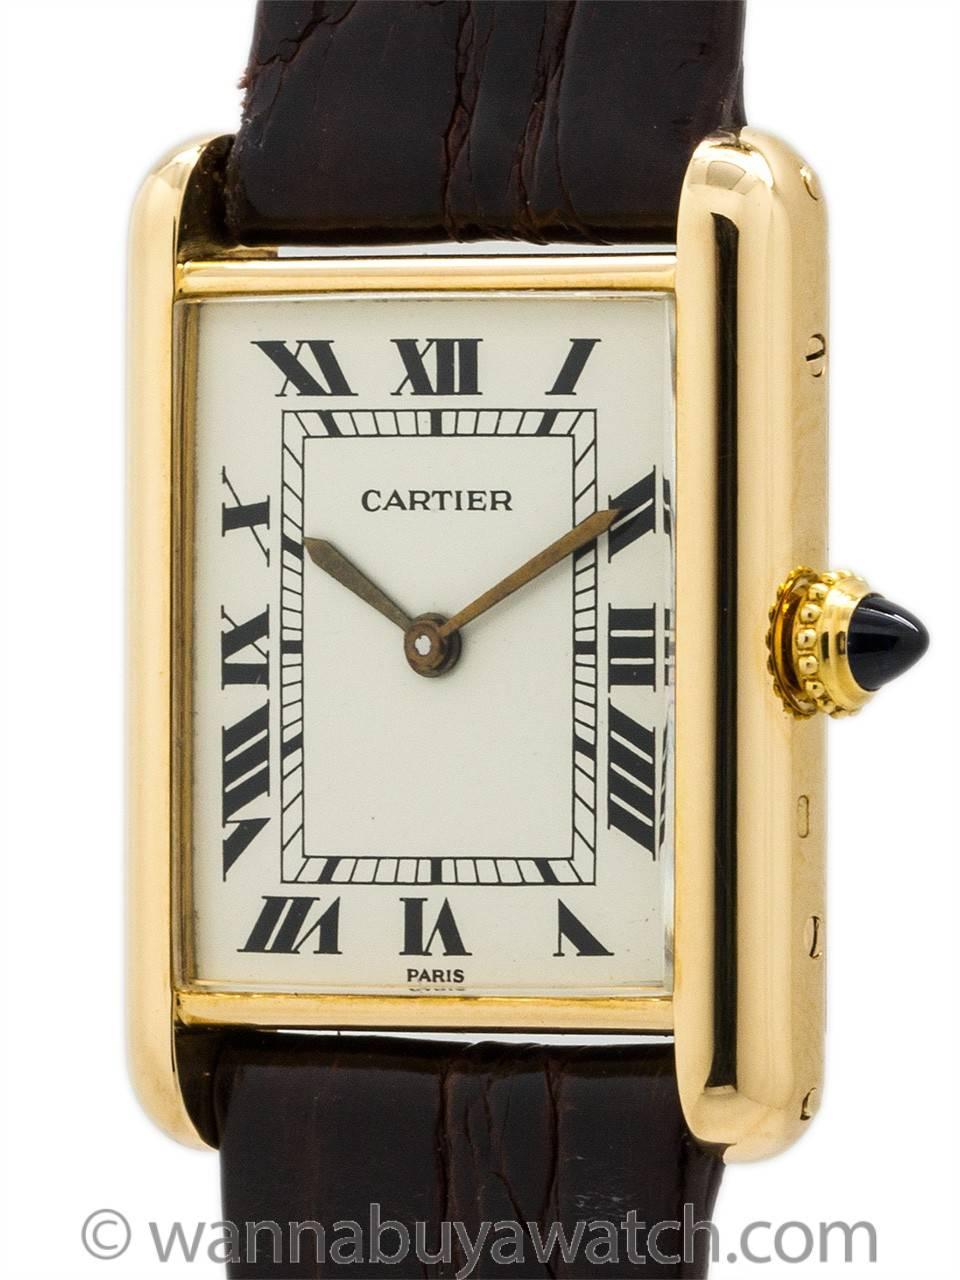 Cartier Tank Louis man’s size 18K YG circa 1970’s with classic white dial and Roman figures, gilted hands, 17 jewel manual wind Cartier signed movement and cabochon sapphire crown. Featuring  man’s small size 23.5 X 31mm case secured by 4 side